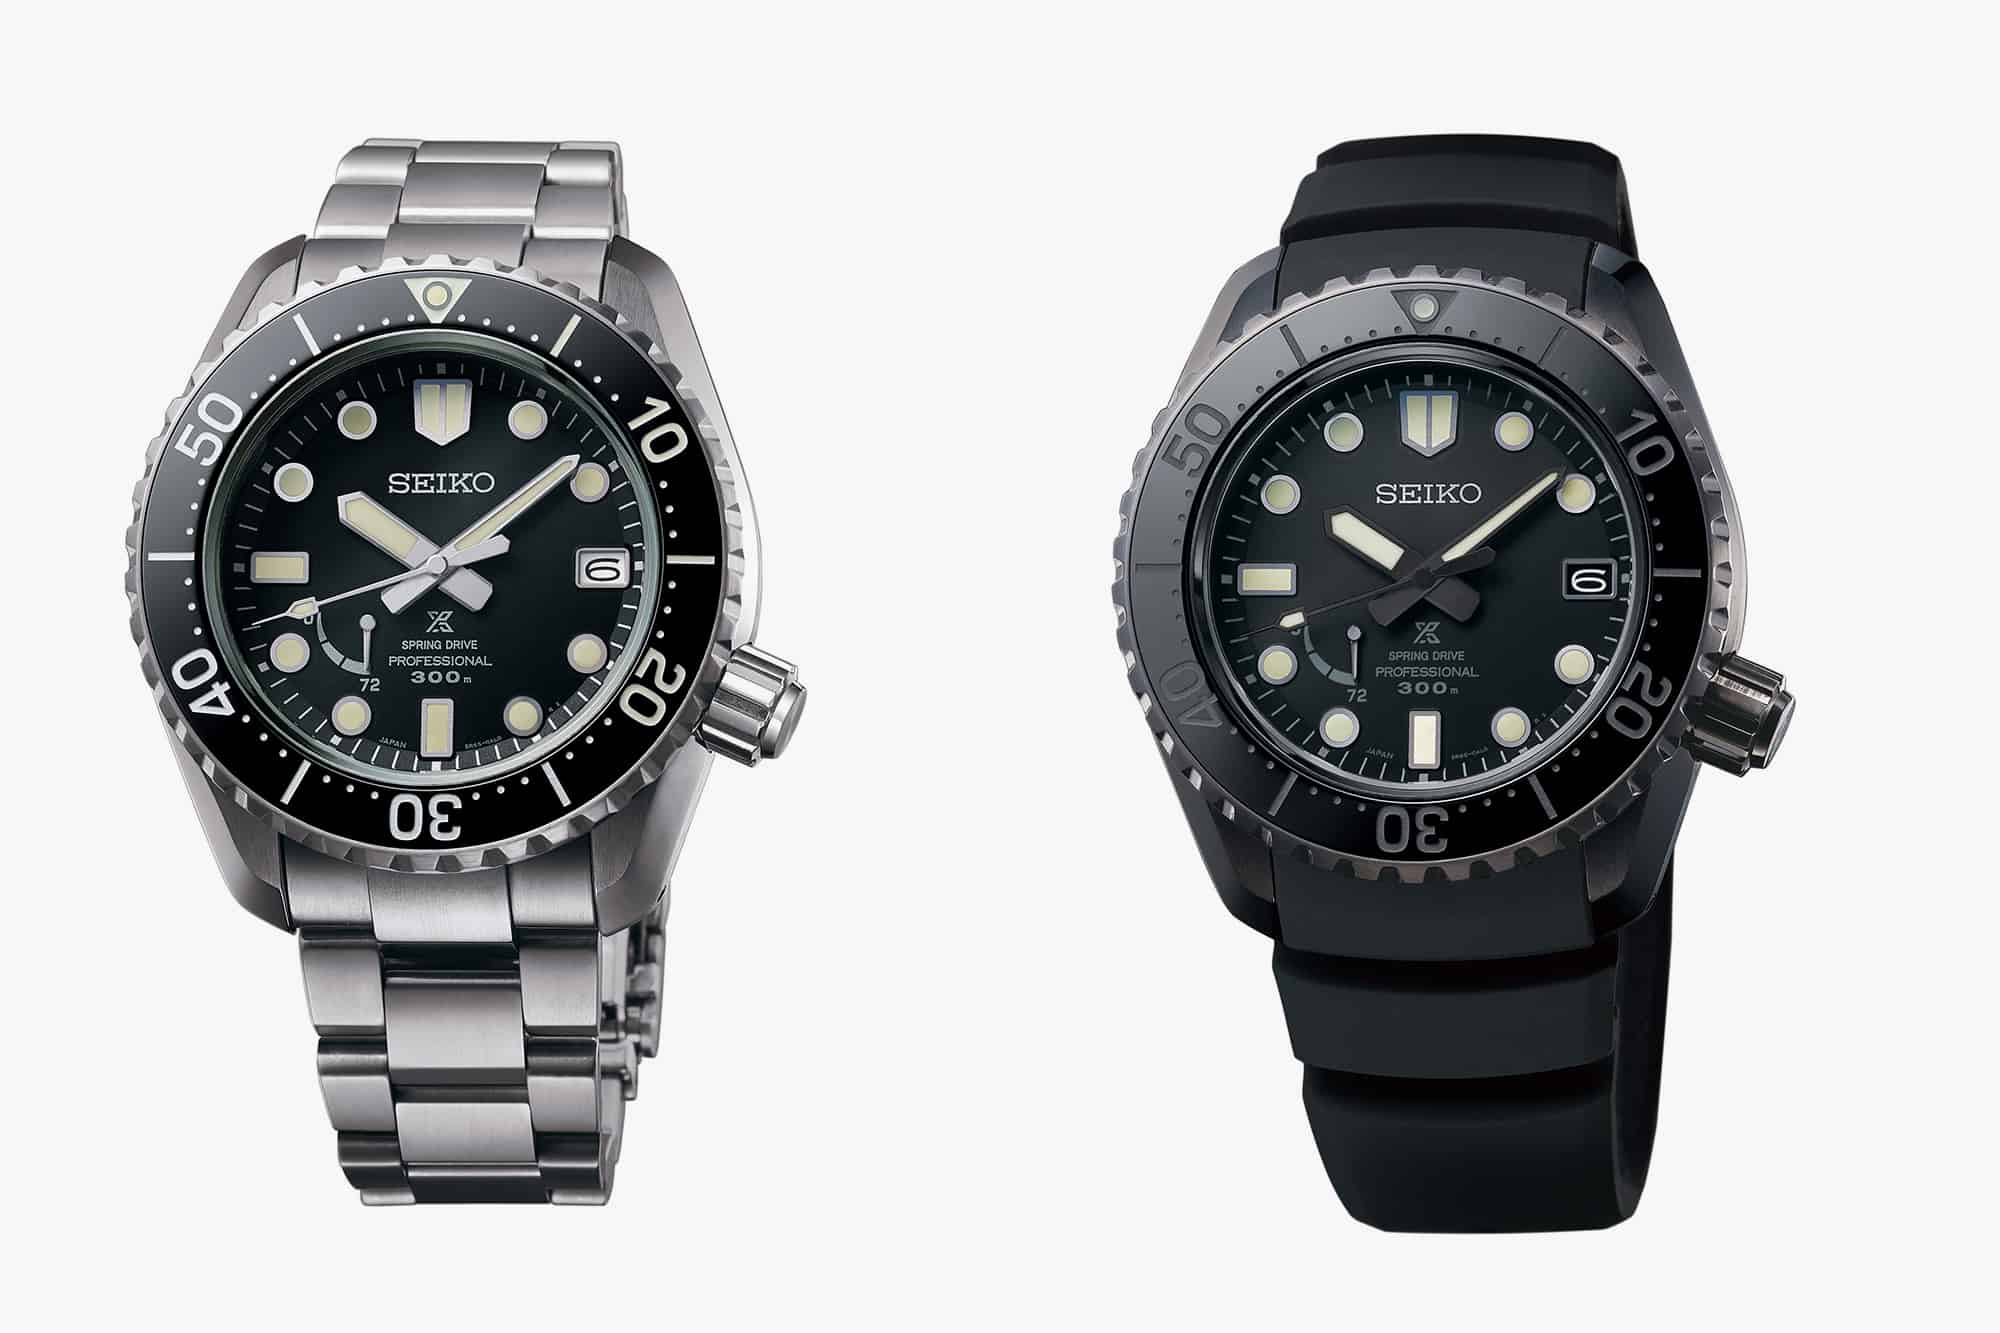 Kosciuszko Ass Penelope Baselworld 2019: Introducing Seiko's Prospex LX Collection, Tool Watches  for Land, Sea, and Sky - Worn & Wound